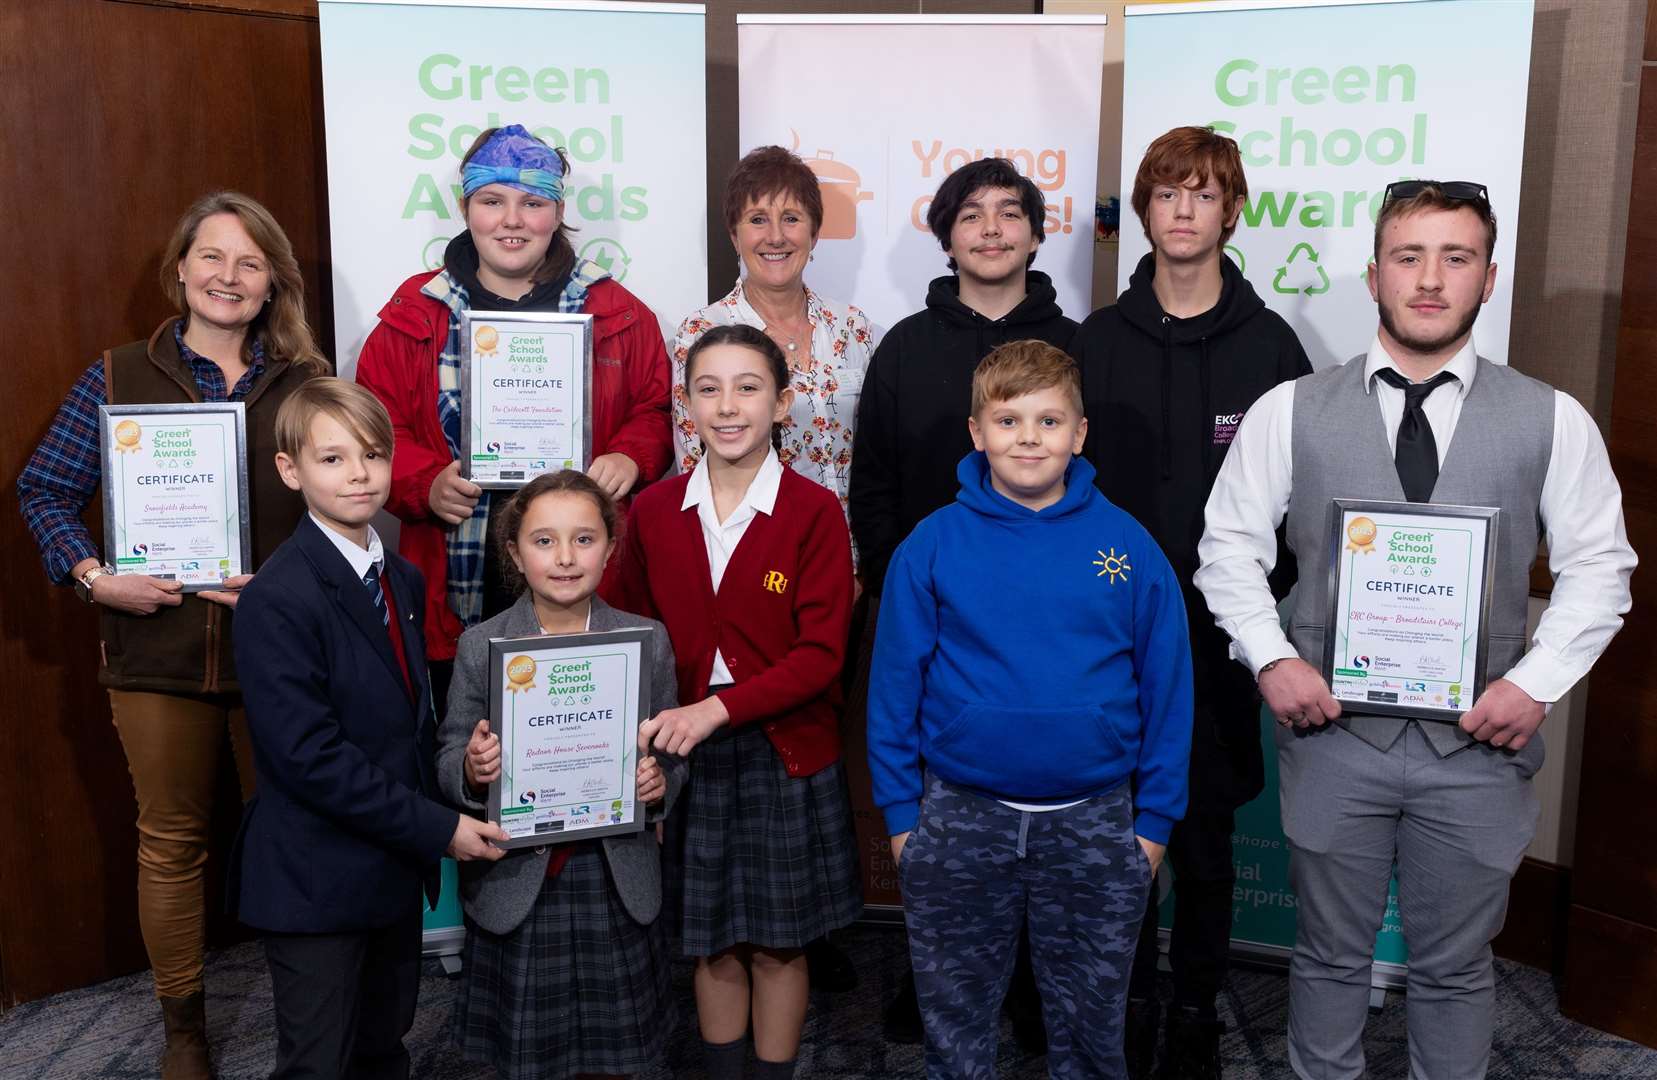 This year’s Green School Awards saw 25 winners recognised for their eco-friendly initiatives. Picture: SEK Social Enterprise Kent